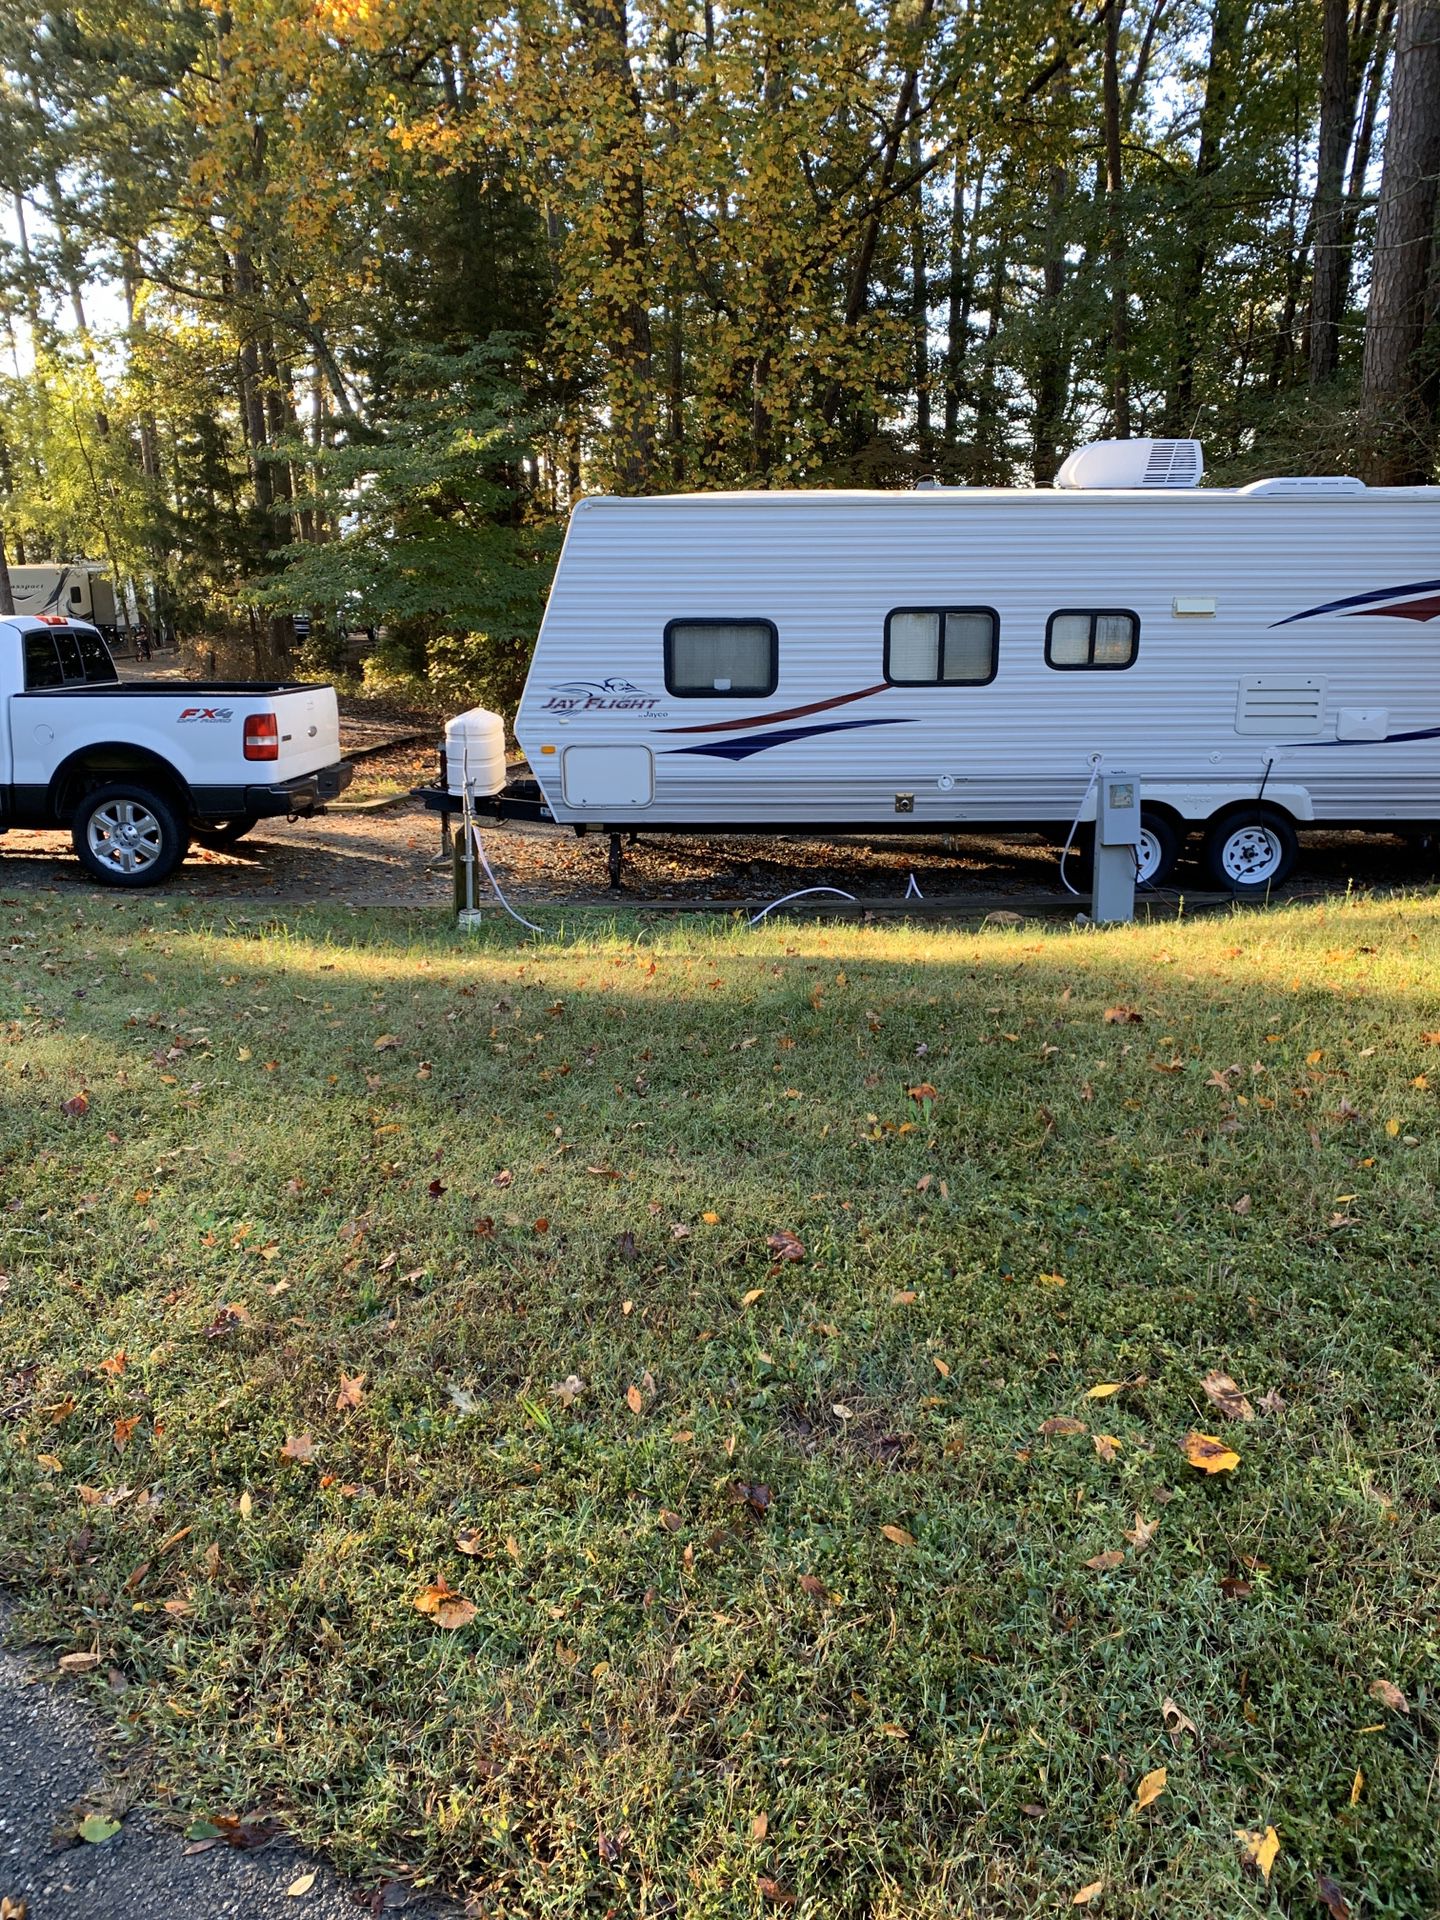 2008 Ford F-150. 2009 jayco 27 ft camper both in good condition